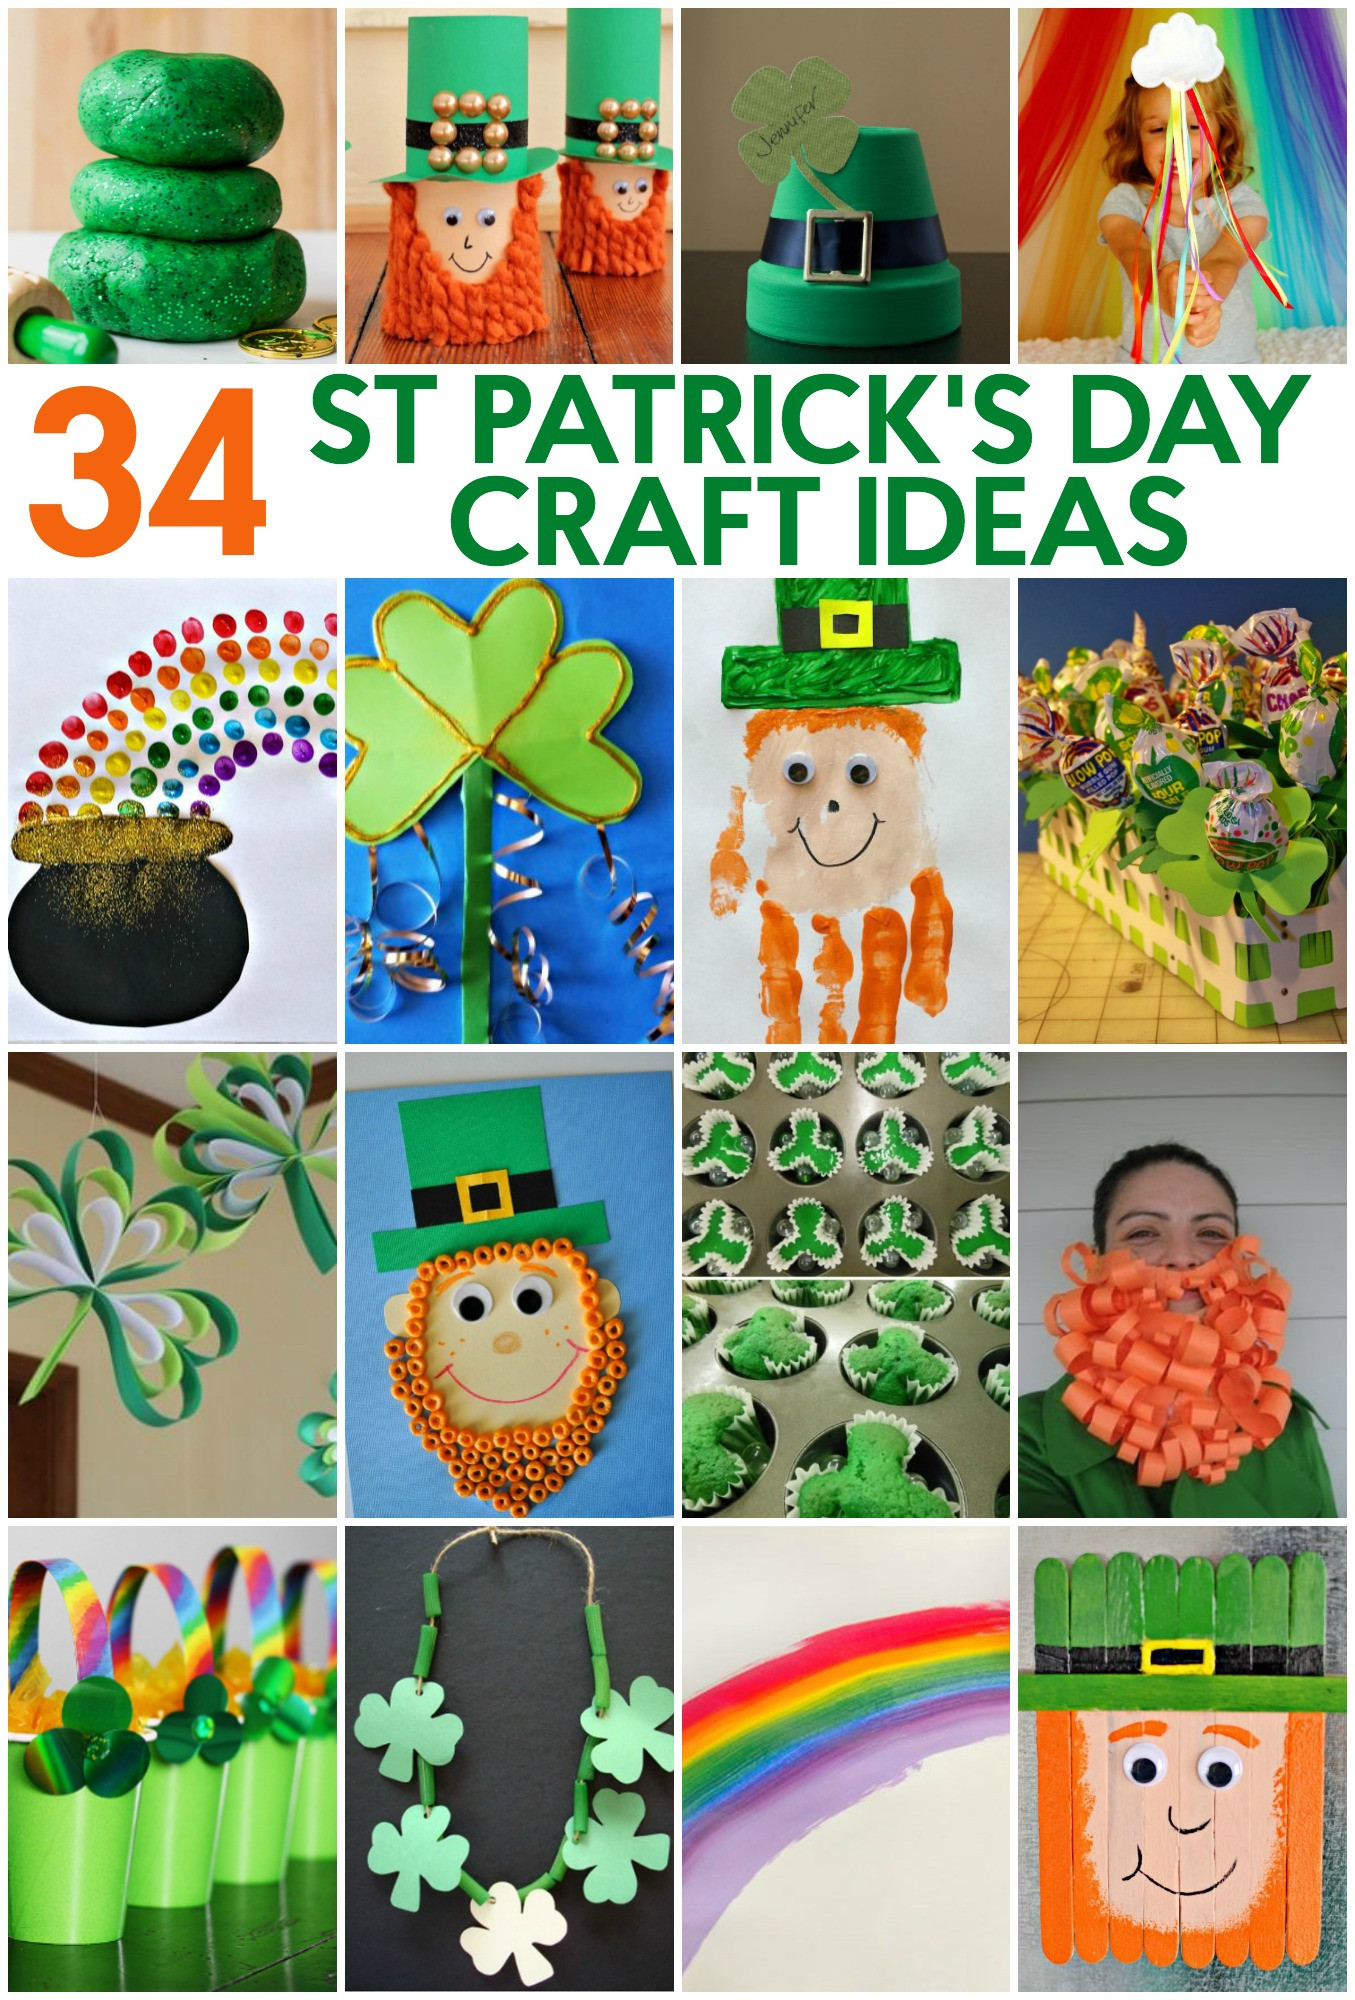 Saint Patrick's Day Crafts
 34 St Patrick s Day Craft Ideas A Little Craft In Your Day